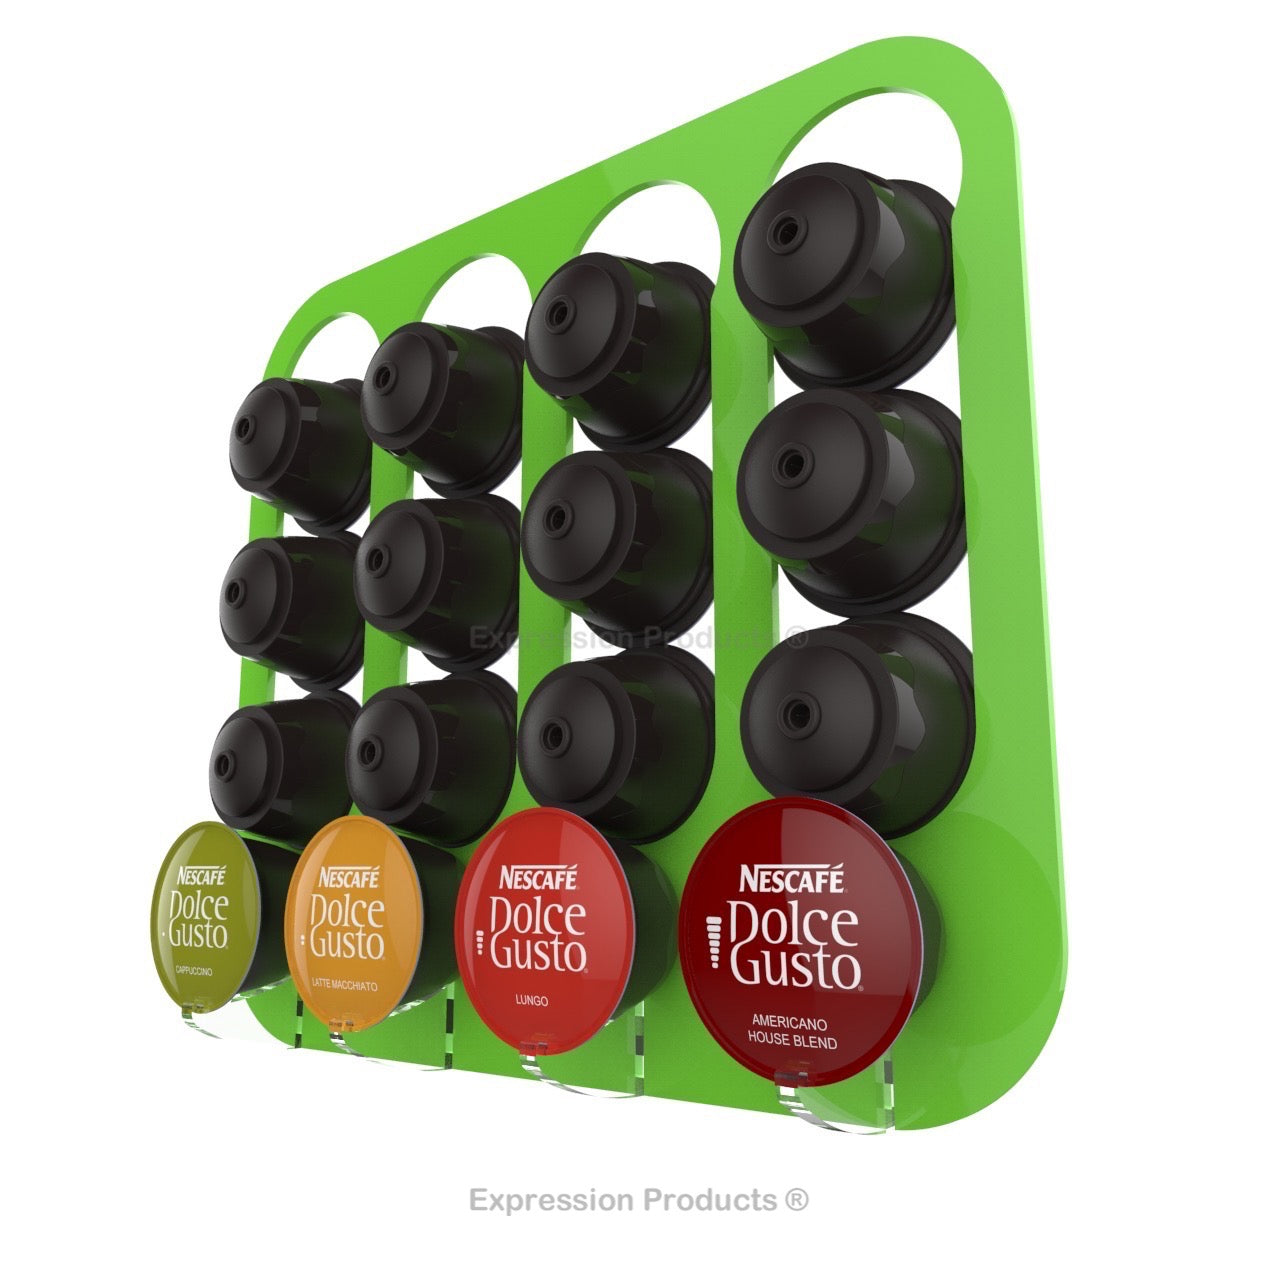 Dolce gusto coffee pod holder, wall mounted, half height.  Shown in lime holding 16 pods